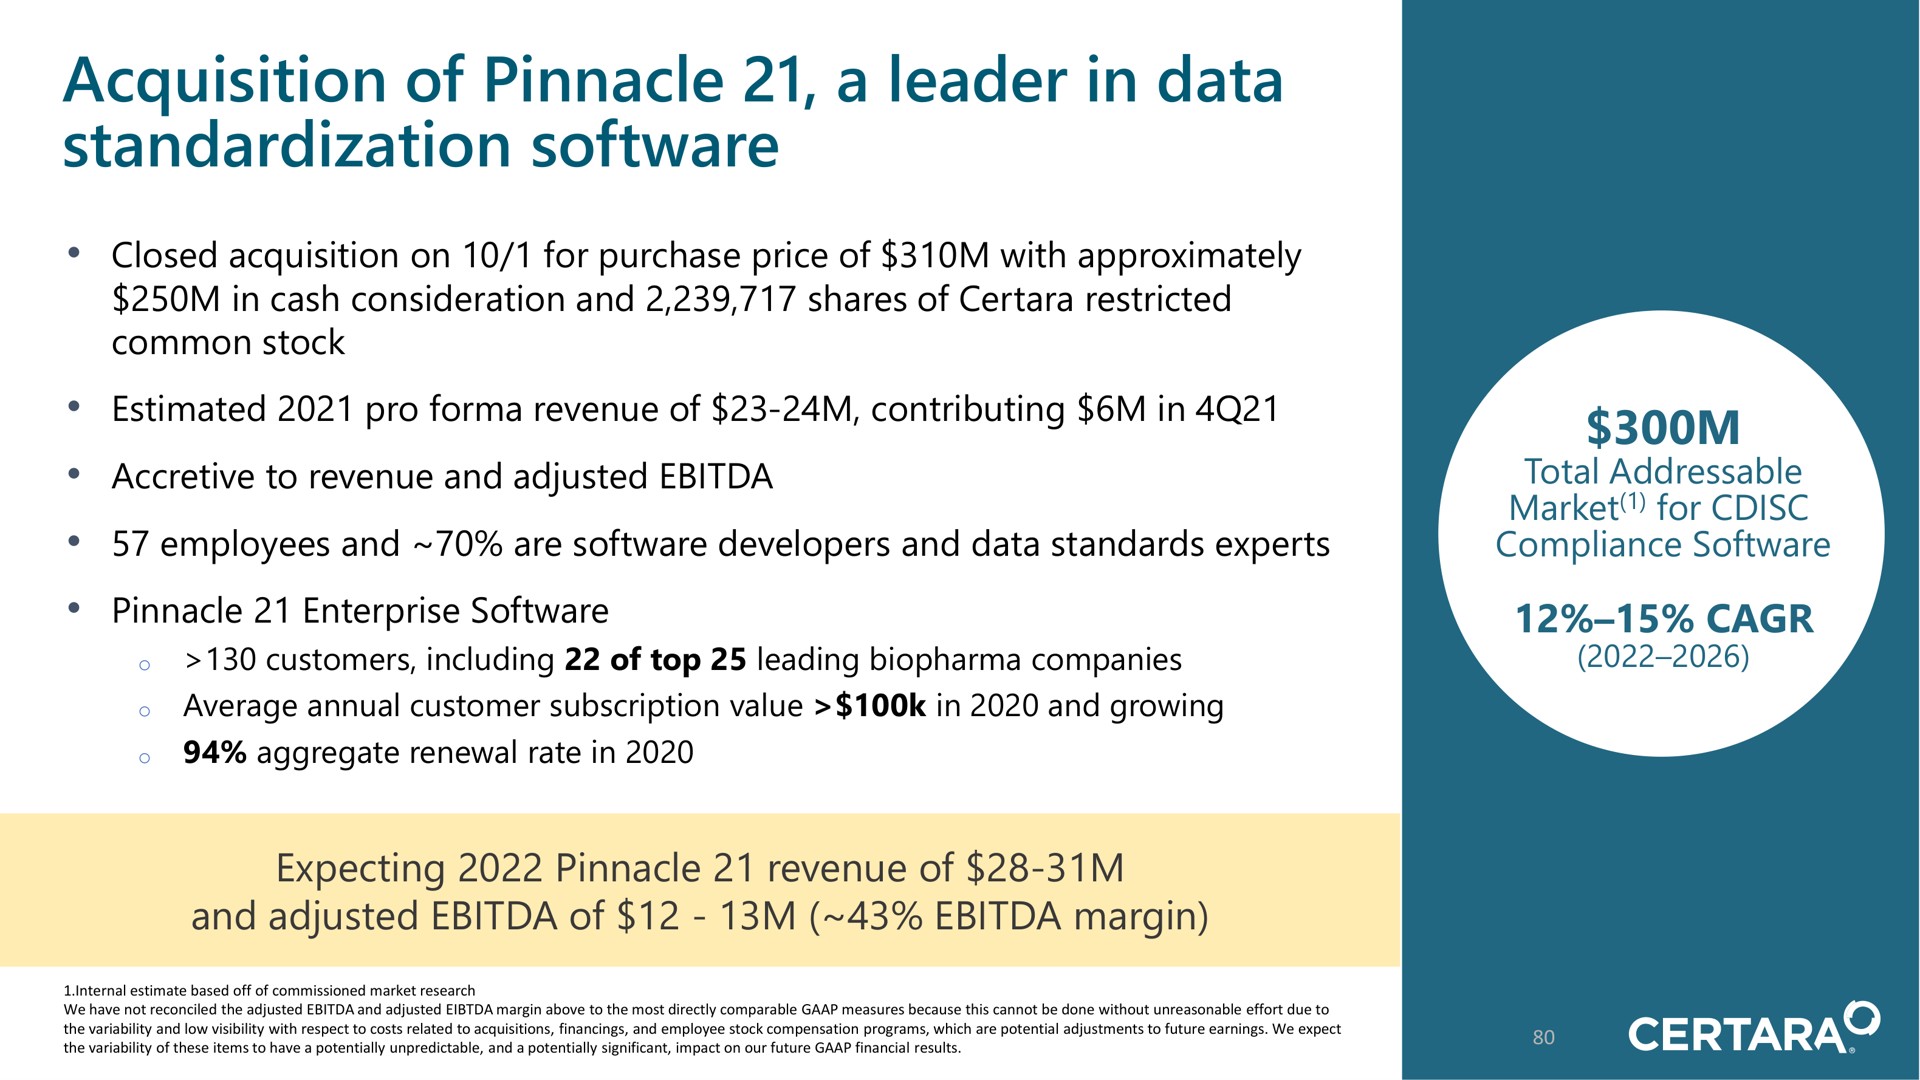 acquisition of pinnacle a leader in data standardization | Certara